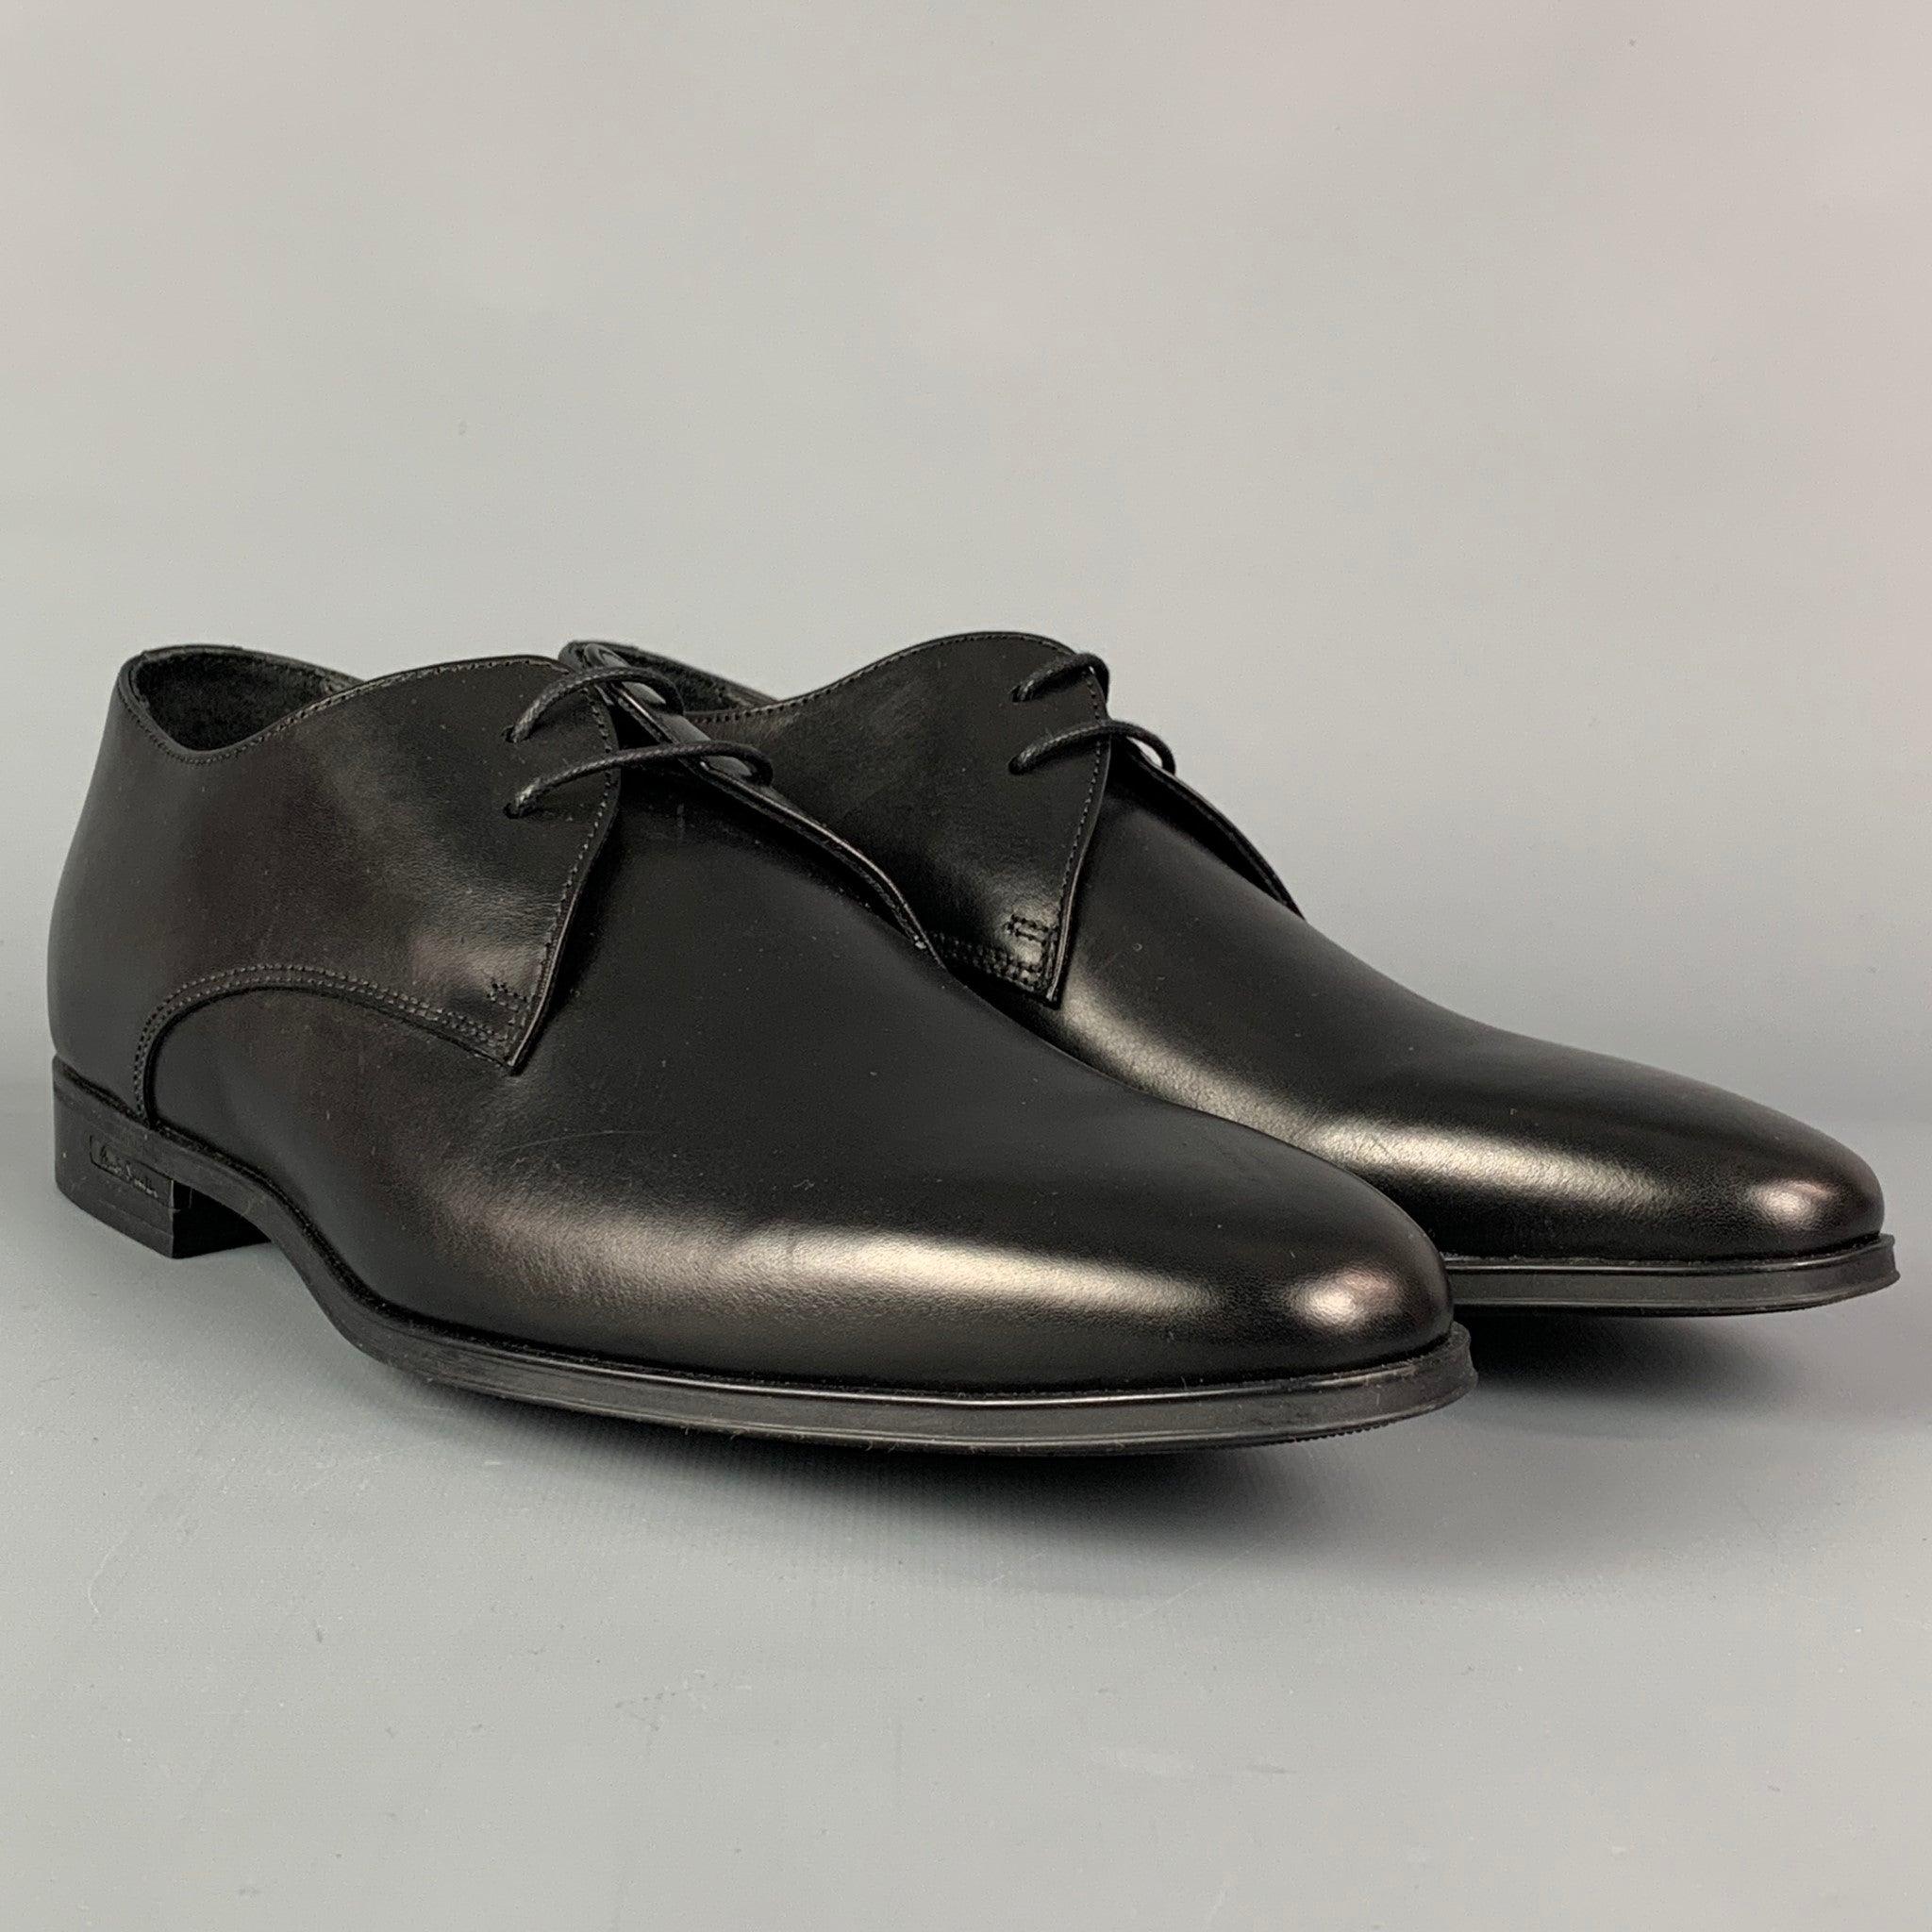 PAUL SMITH shoes comes in a black leather featuring a rubber sole and a lace up closure. Made in Italy.
Very Good
Pre-Owned Condition. 

Marked:  
C0N01 6 40Outsole: 11.5 inches  x 4 inches 
  
  
 
Reference: 114642
Category: Lace Up Shoes
More